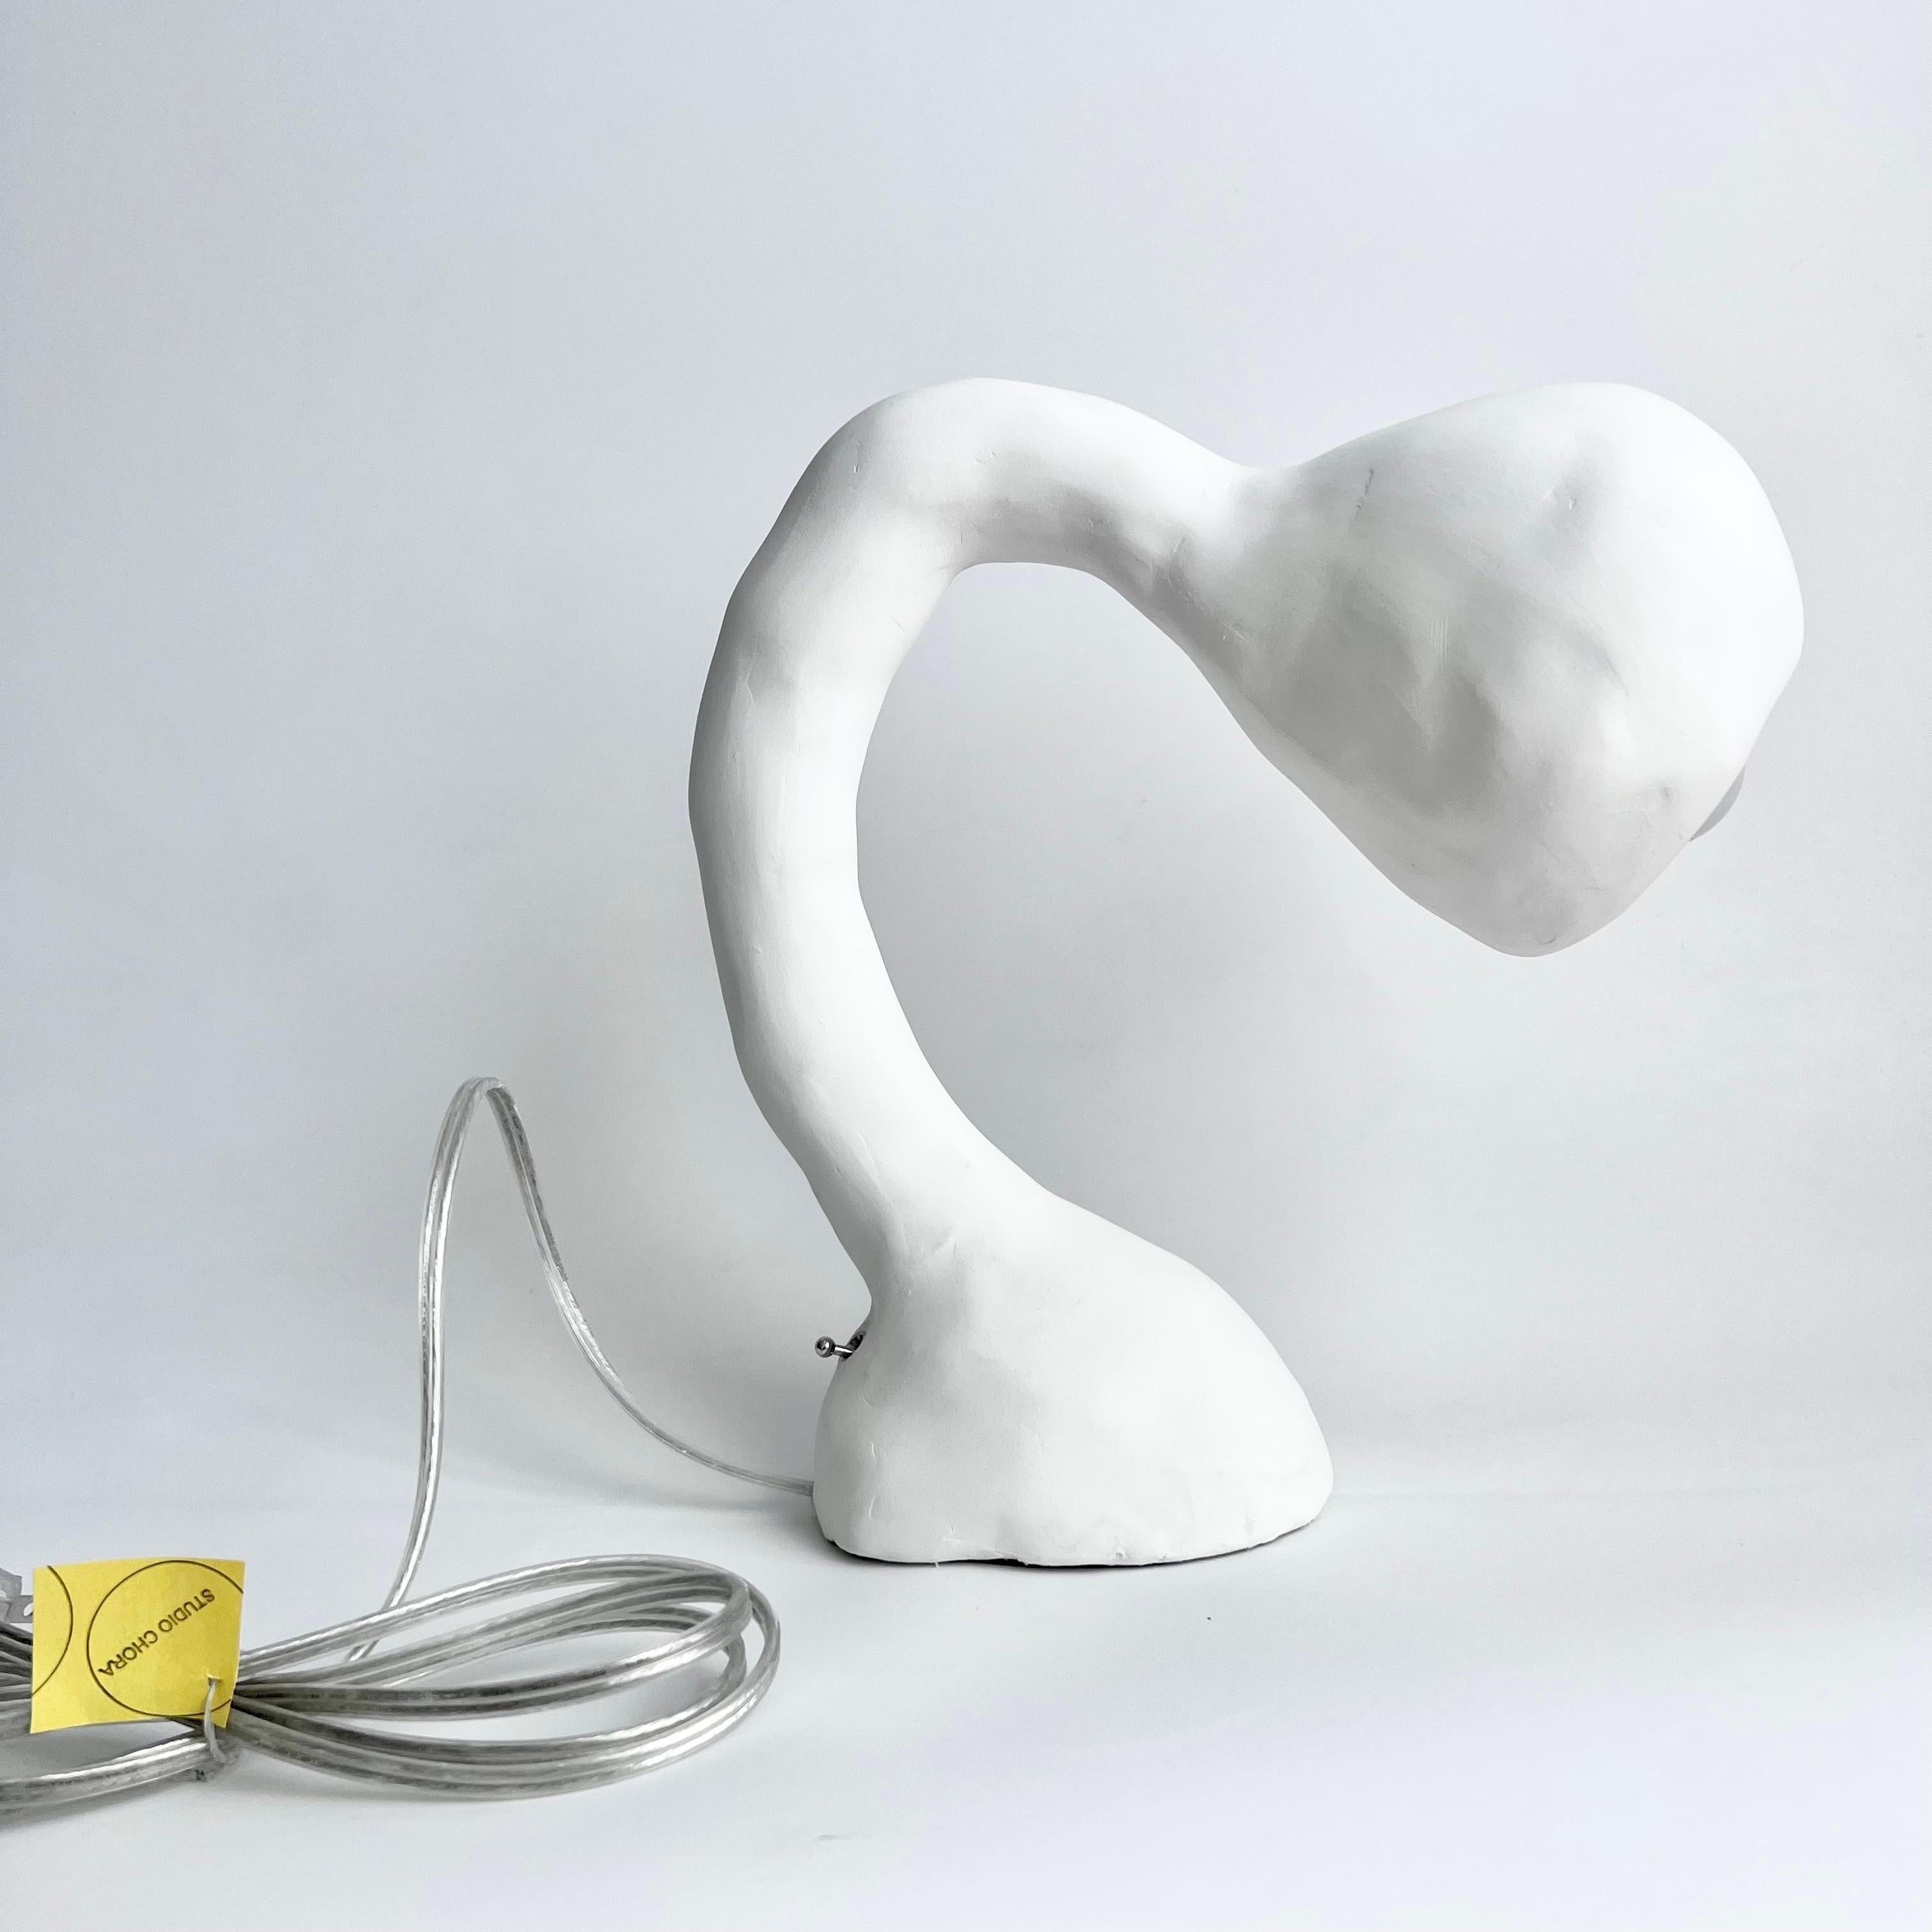 Carved Biomorphic Light by Studio Chora, Table Lamp, White Limestone, In Stock